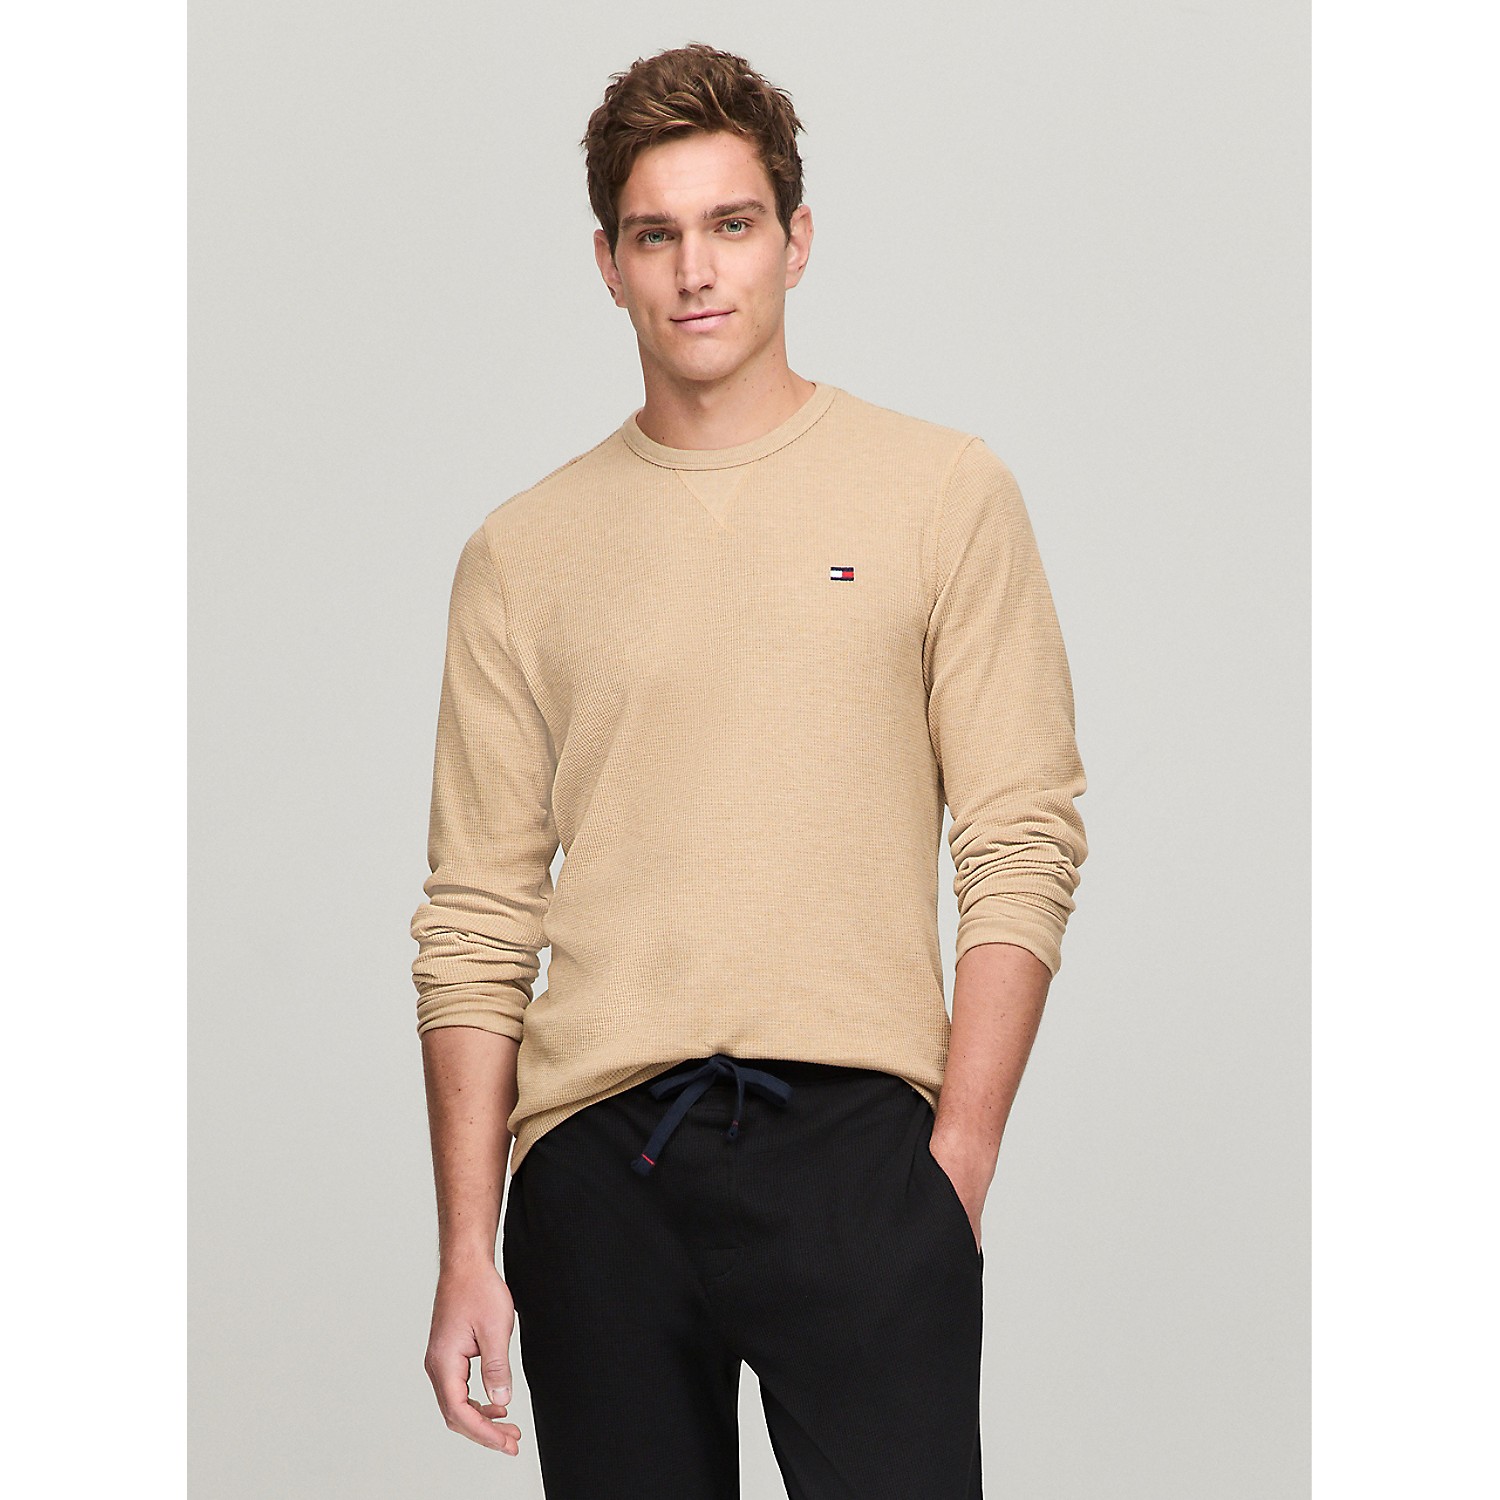 TOMMY HILFIGER Thermal Lounge T-Shirt